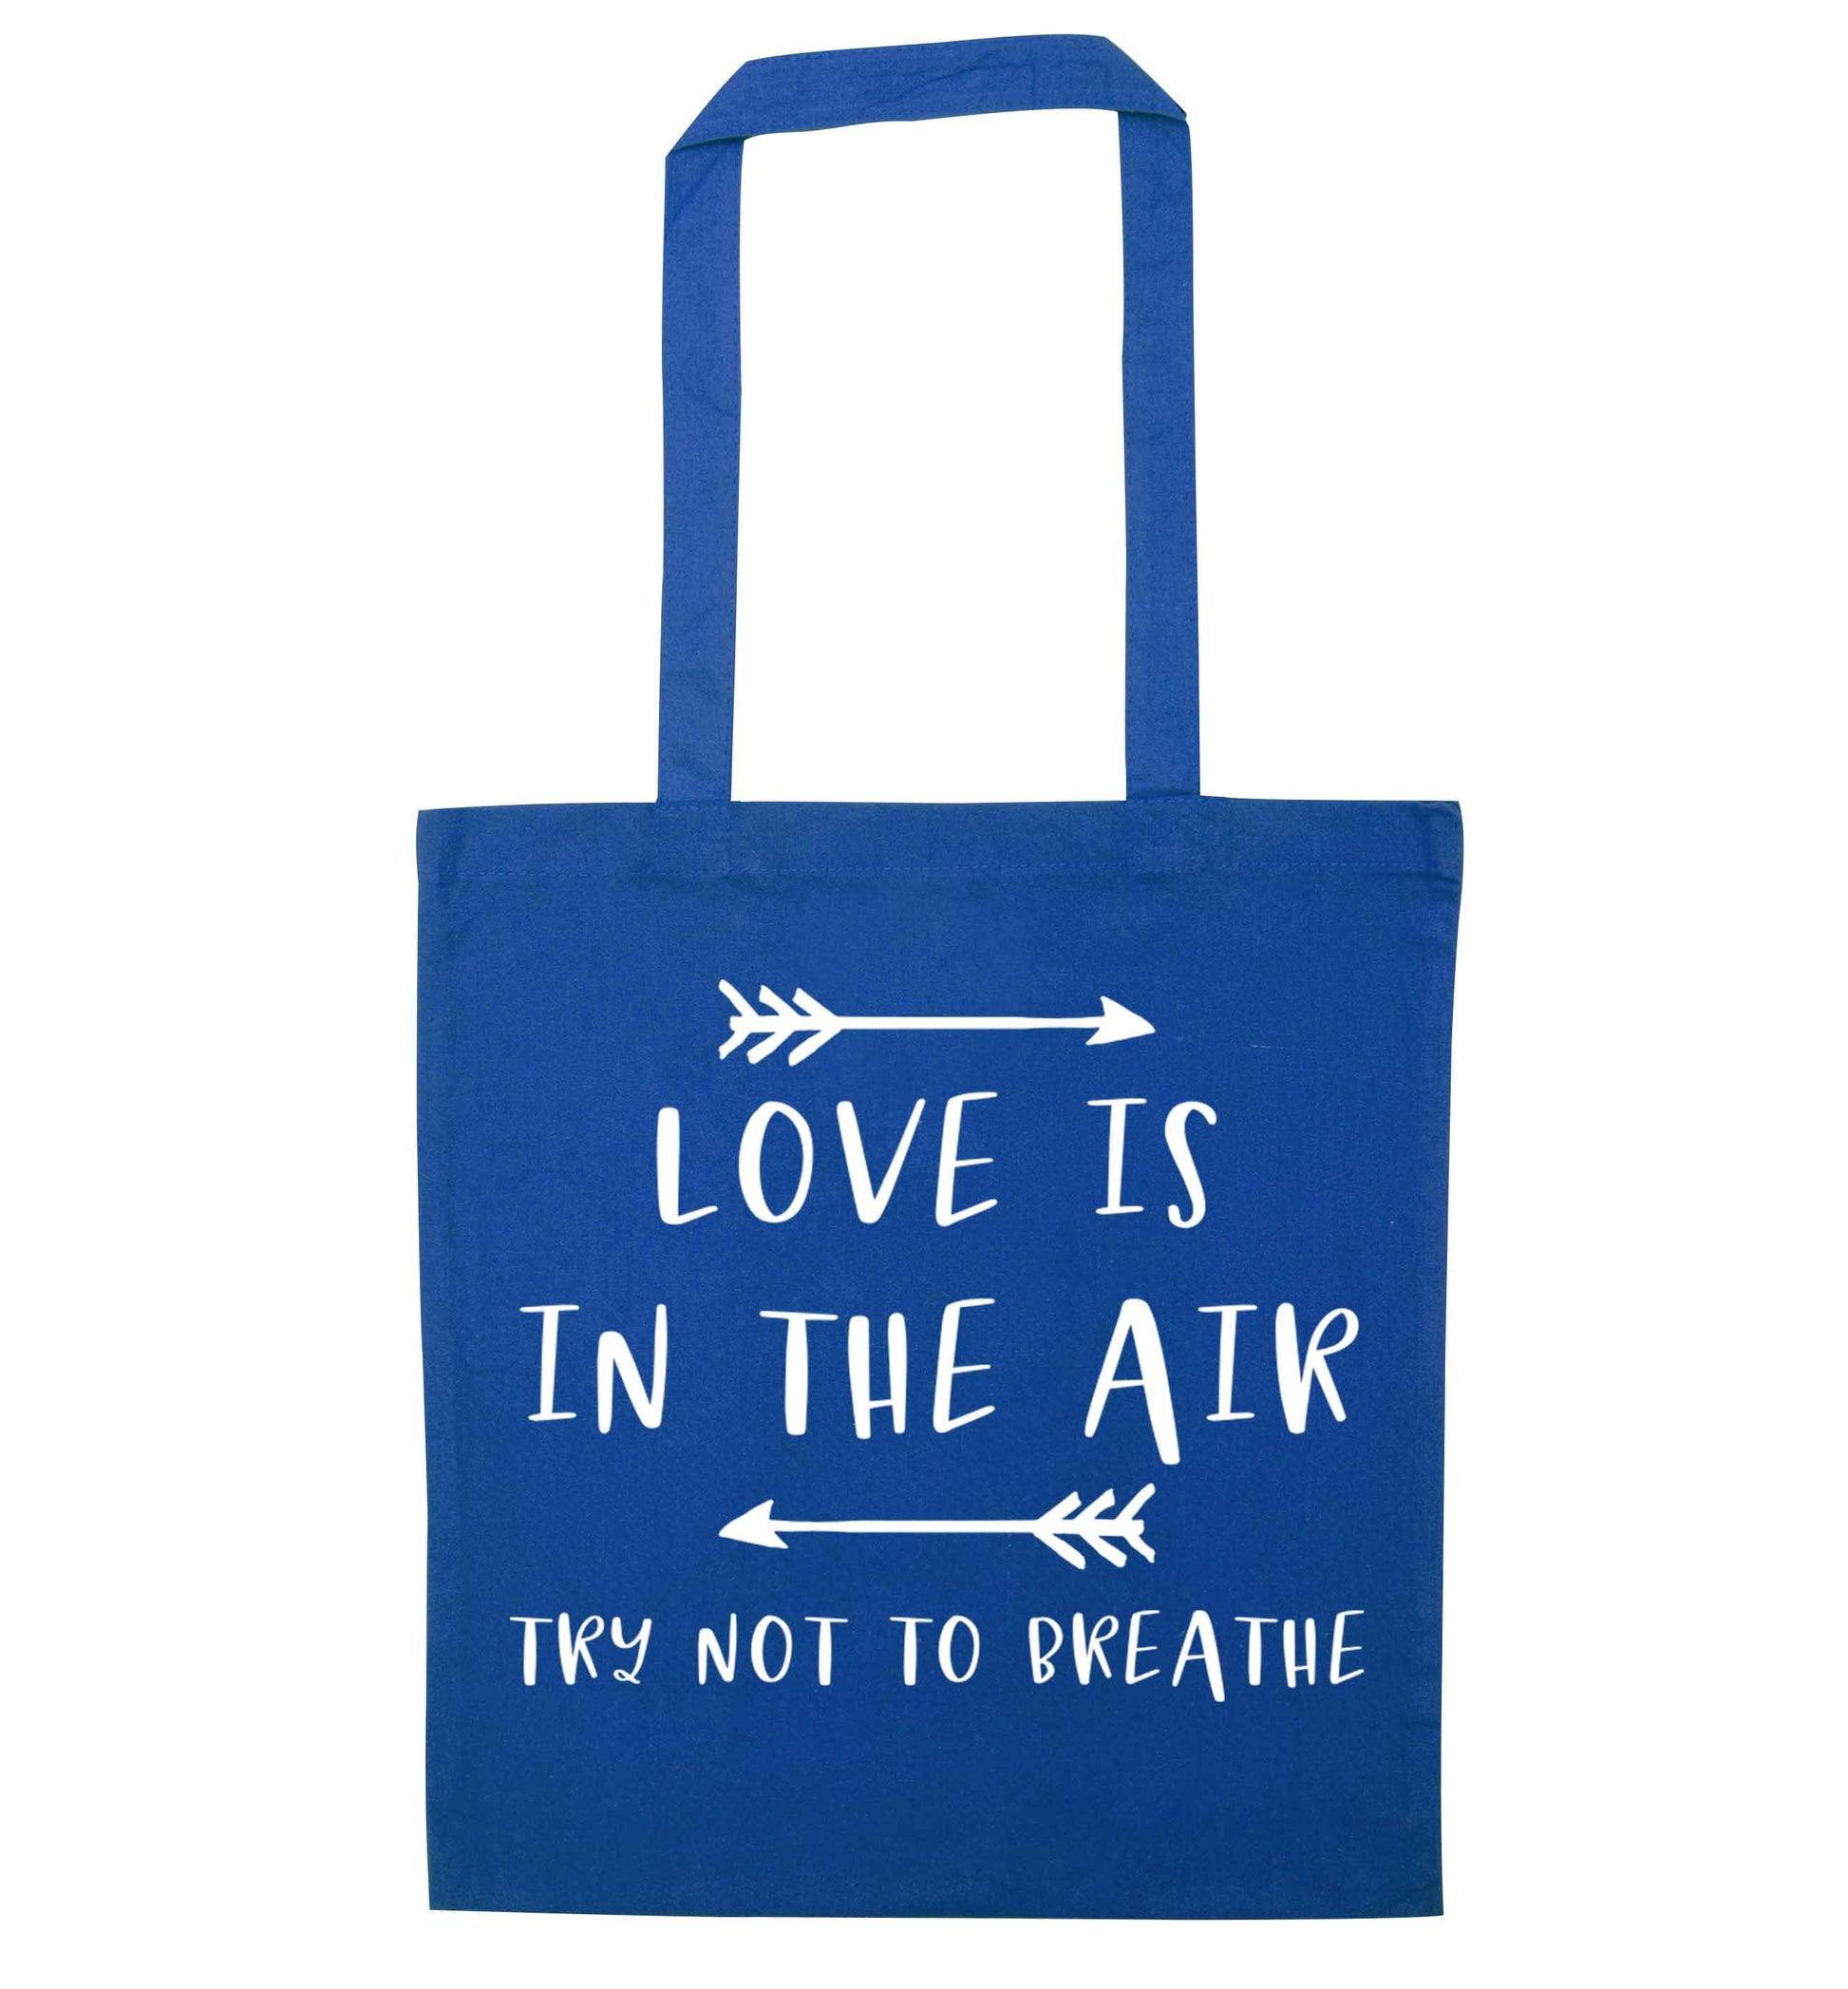 Love is in the air try not to breathe blue tote bag